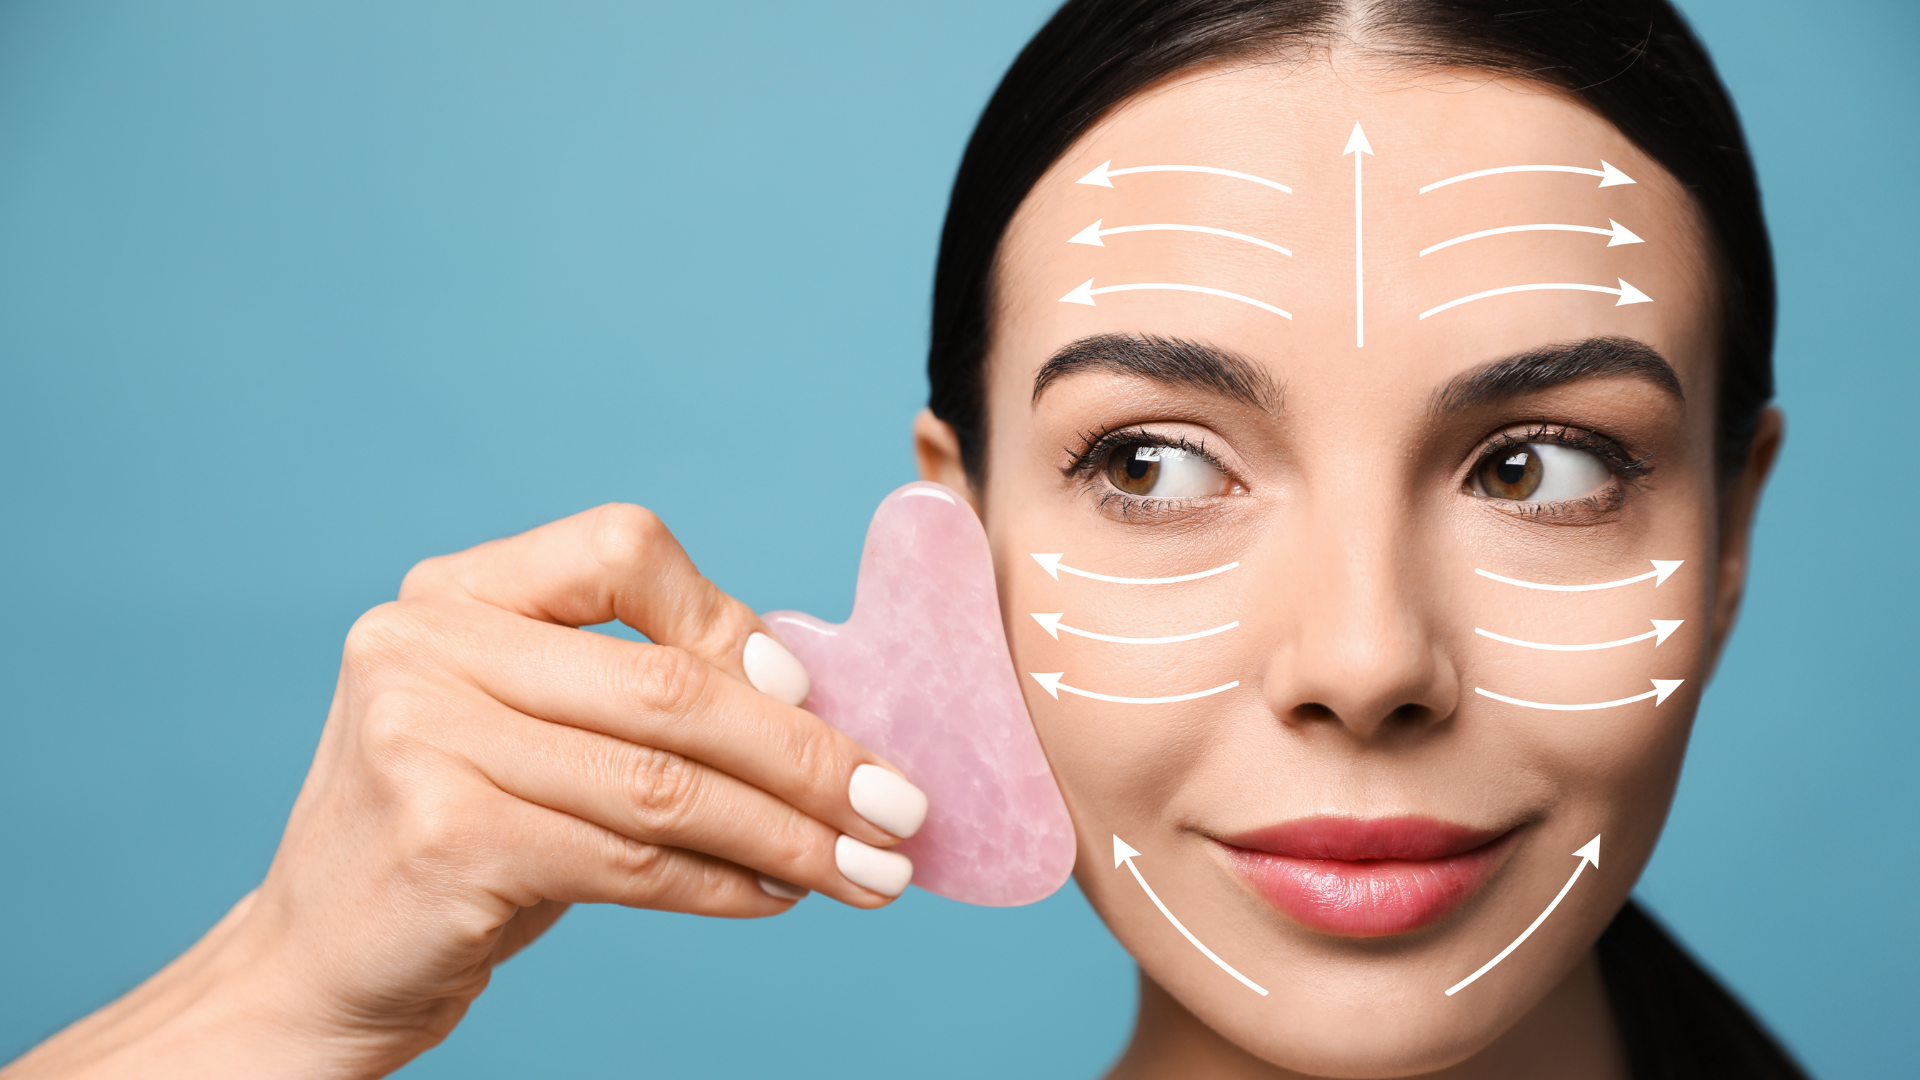 Gua Sha - application and effect of the TCM beauty trend